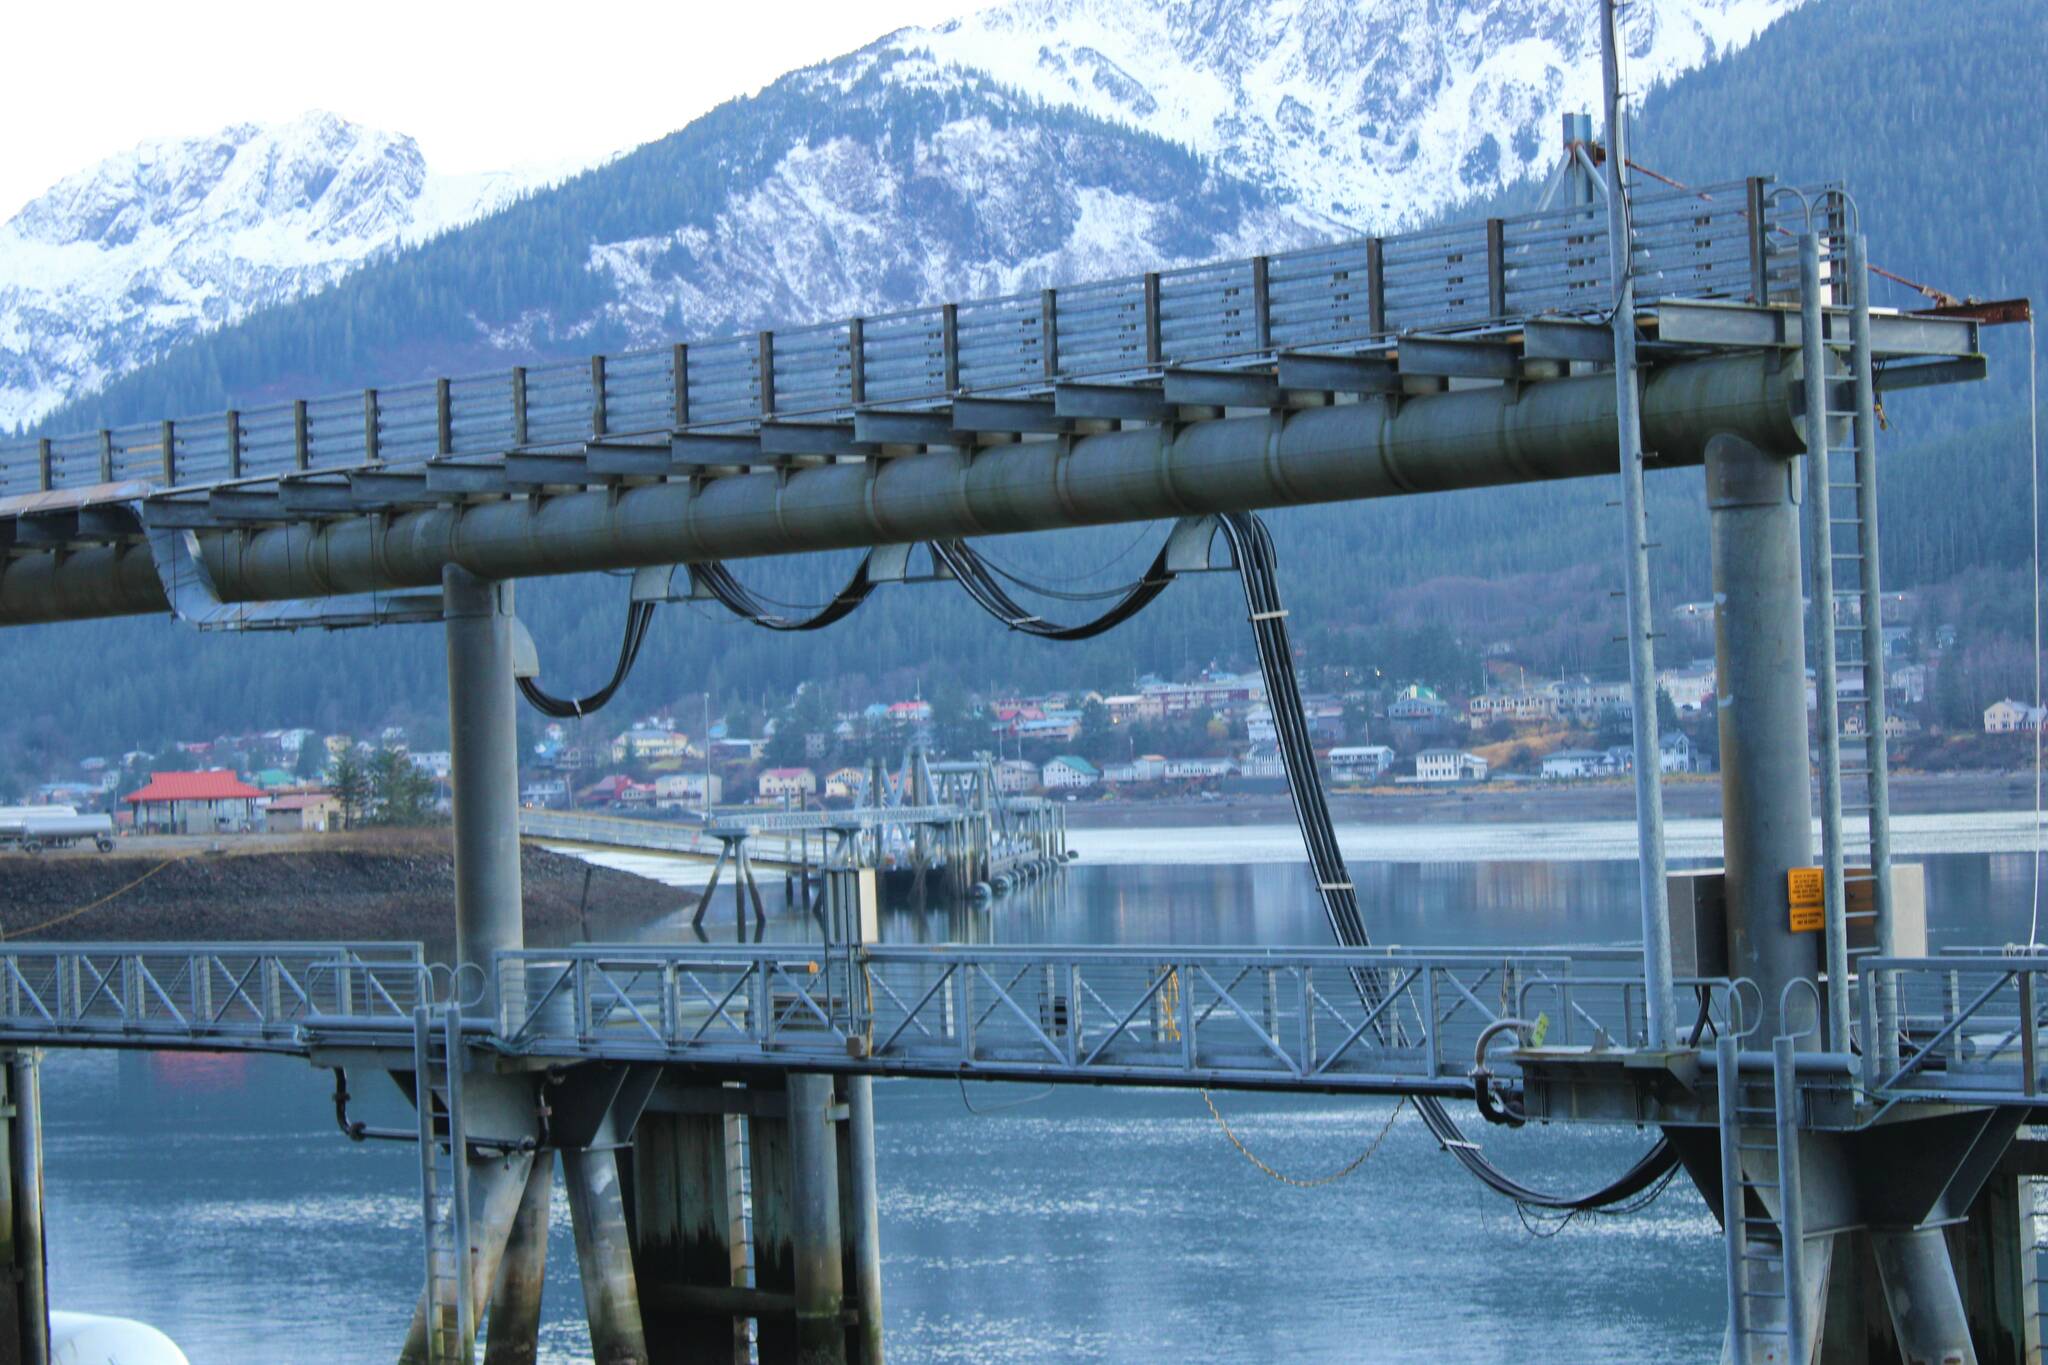 Currently, the privately owned Franklin Street dock shown in this Nov. 1 photo is Juneau’s only electrified dock. Plans are underway to electrify two city-owned cruise ship docks. In addition to electrifying city-owned docks, more electric docks may be on the horizon for Juneau, as Norwegian Cruise Lines eyes electrification for the cruise ship dock the company seeks to build on their waterfront property on Egan Drive. (Dana Zigmund / Juneau Empire)